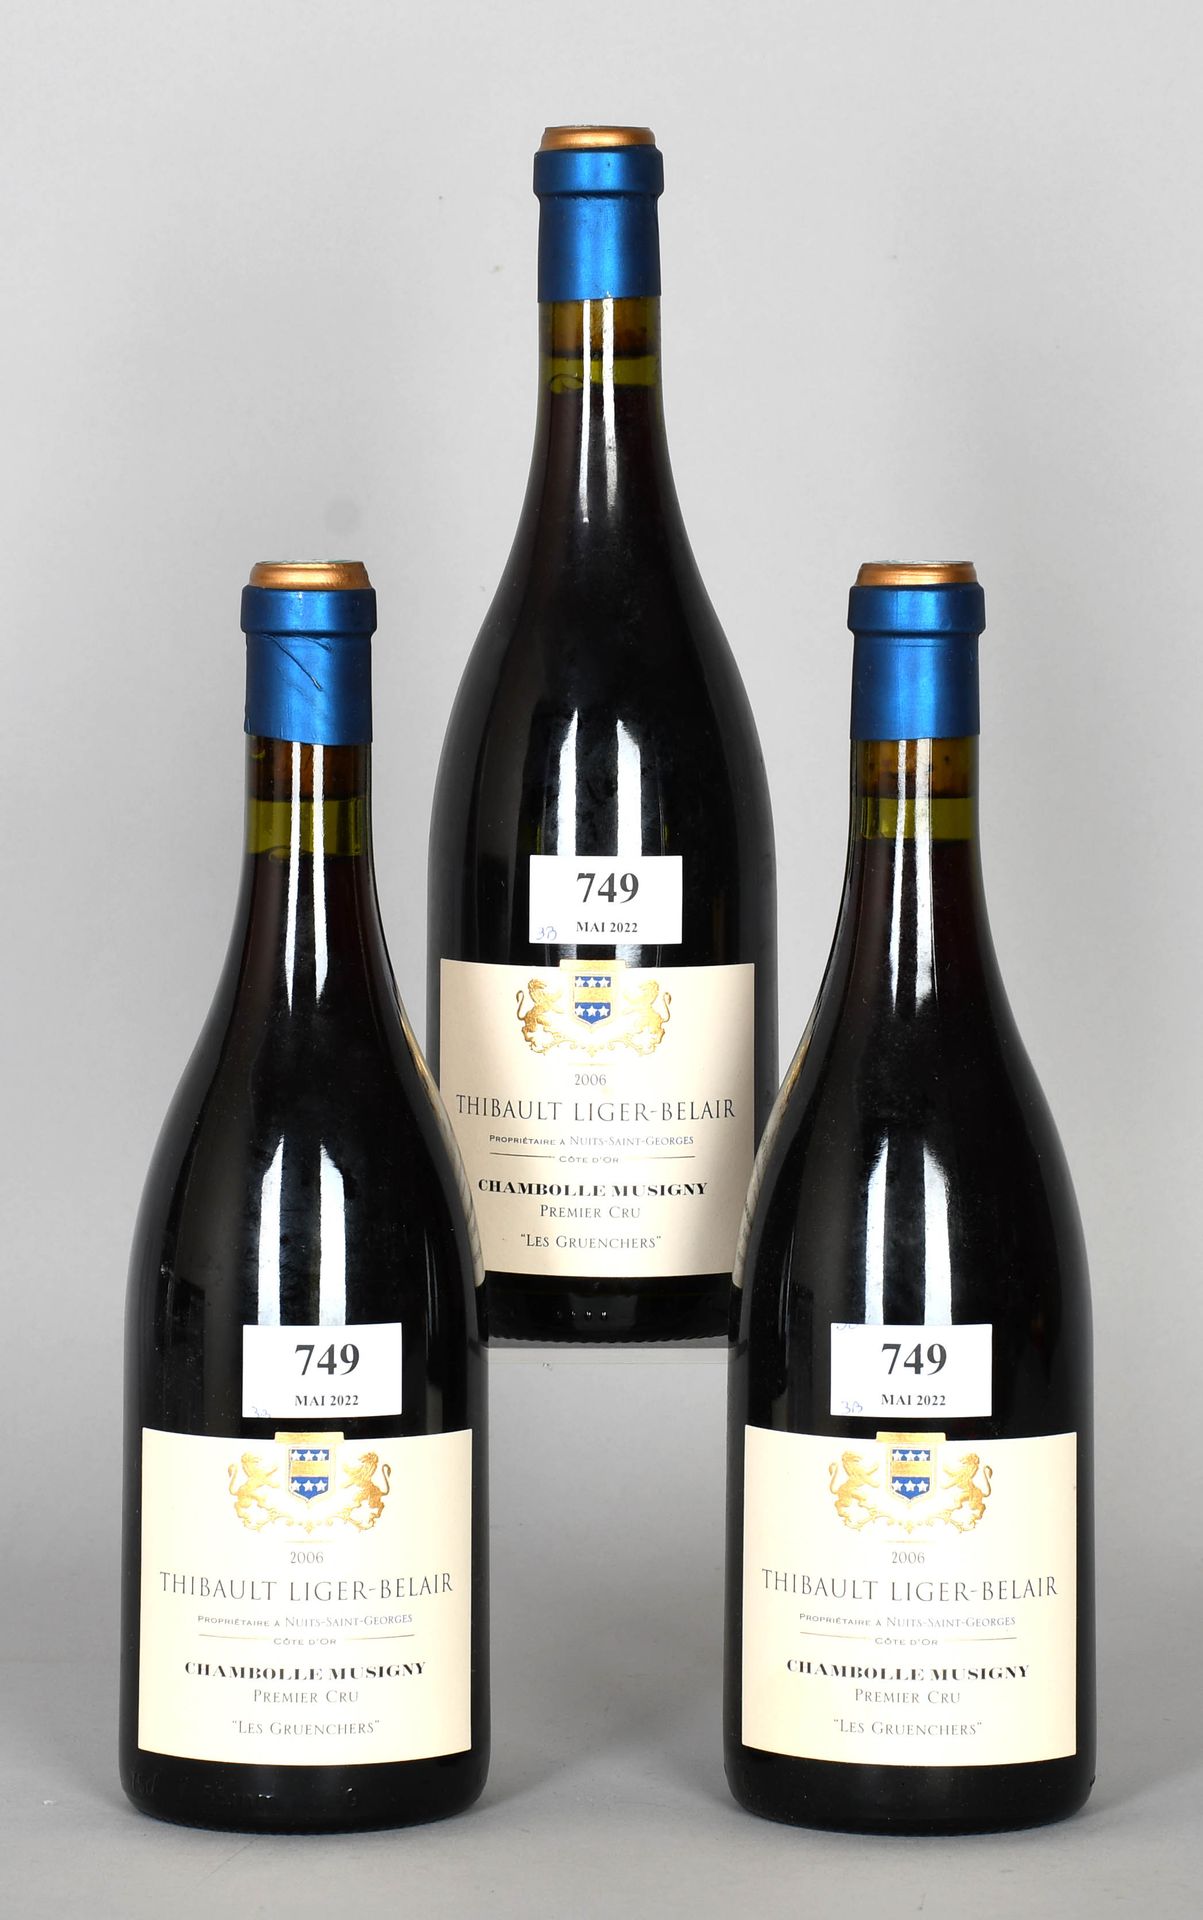 Null Chambolle-Musigny 2006 - Mise domaine - Three bottles of wine

"Les Gruench&hellip;